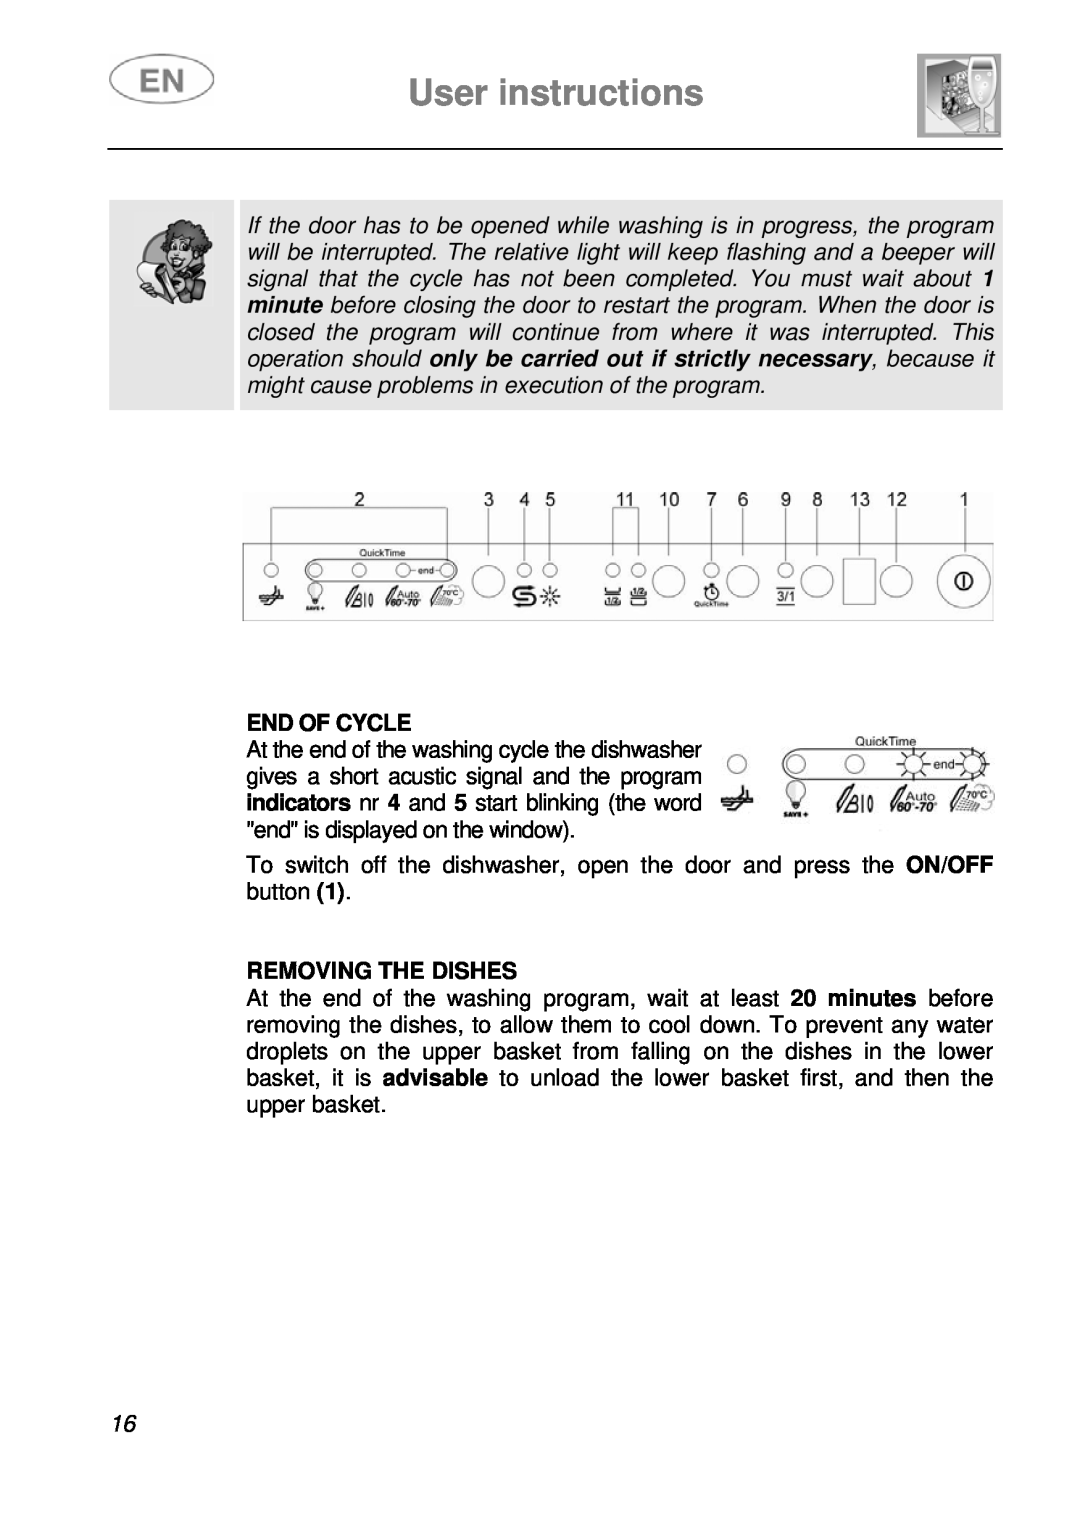 Smeg STA643PQ manual User instructions, End Of Cycle, Removing The Dishes 